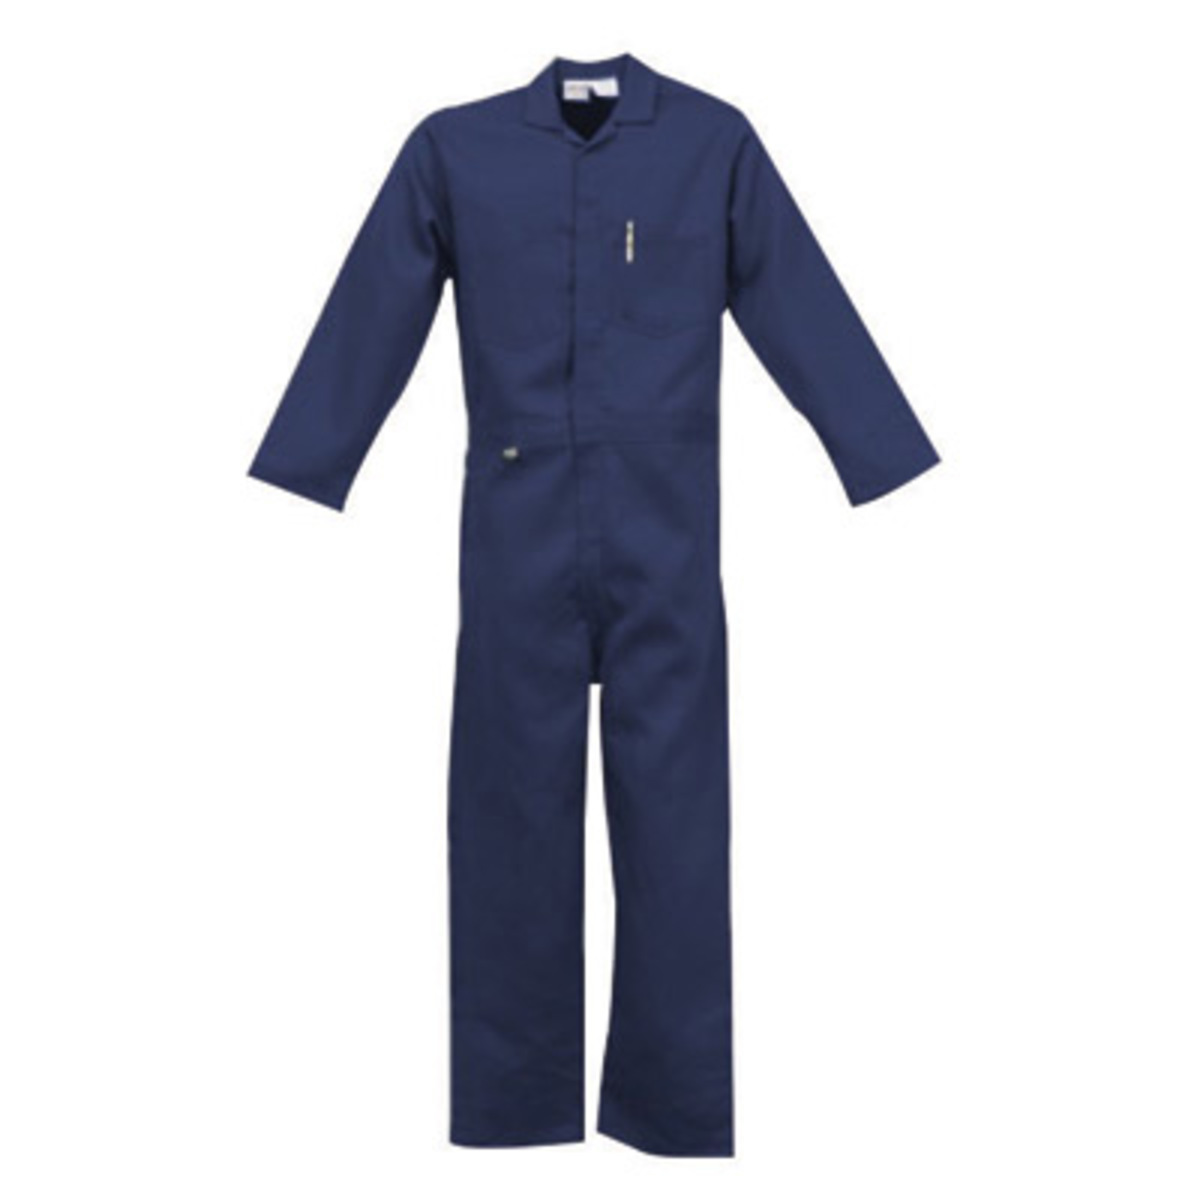 Stanco Safety Products™ Size 4X Navy Blue Indura® UltraSoft® Arc Rated Flame Resistant Coveralls With Front Zipper Closure